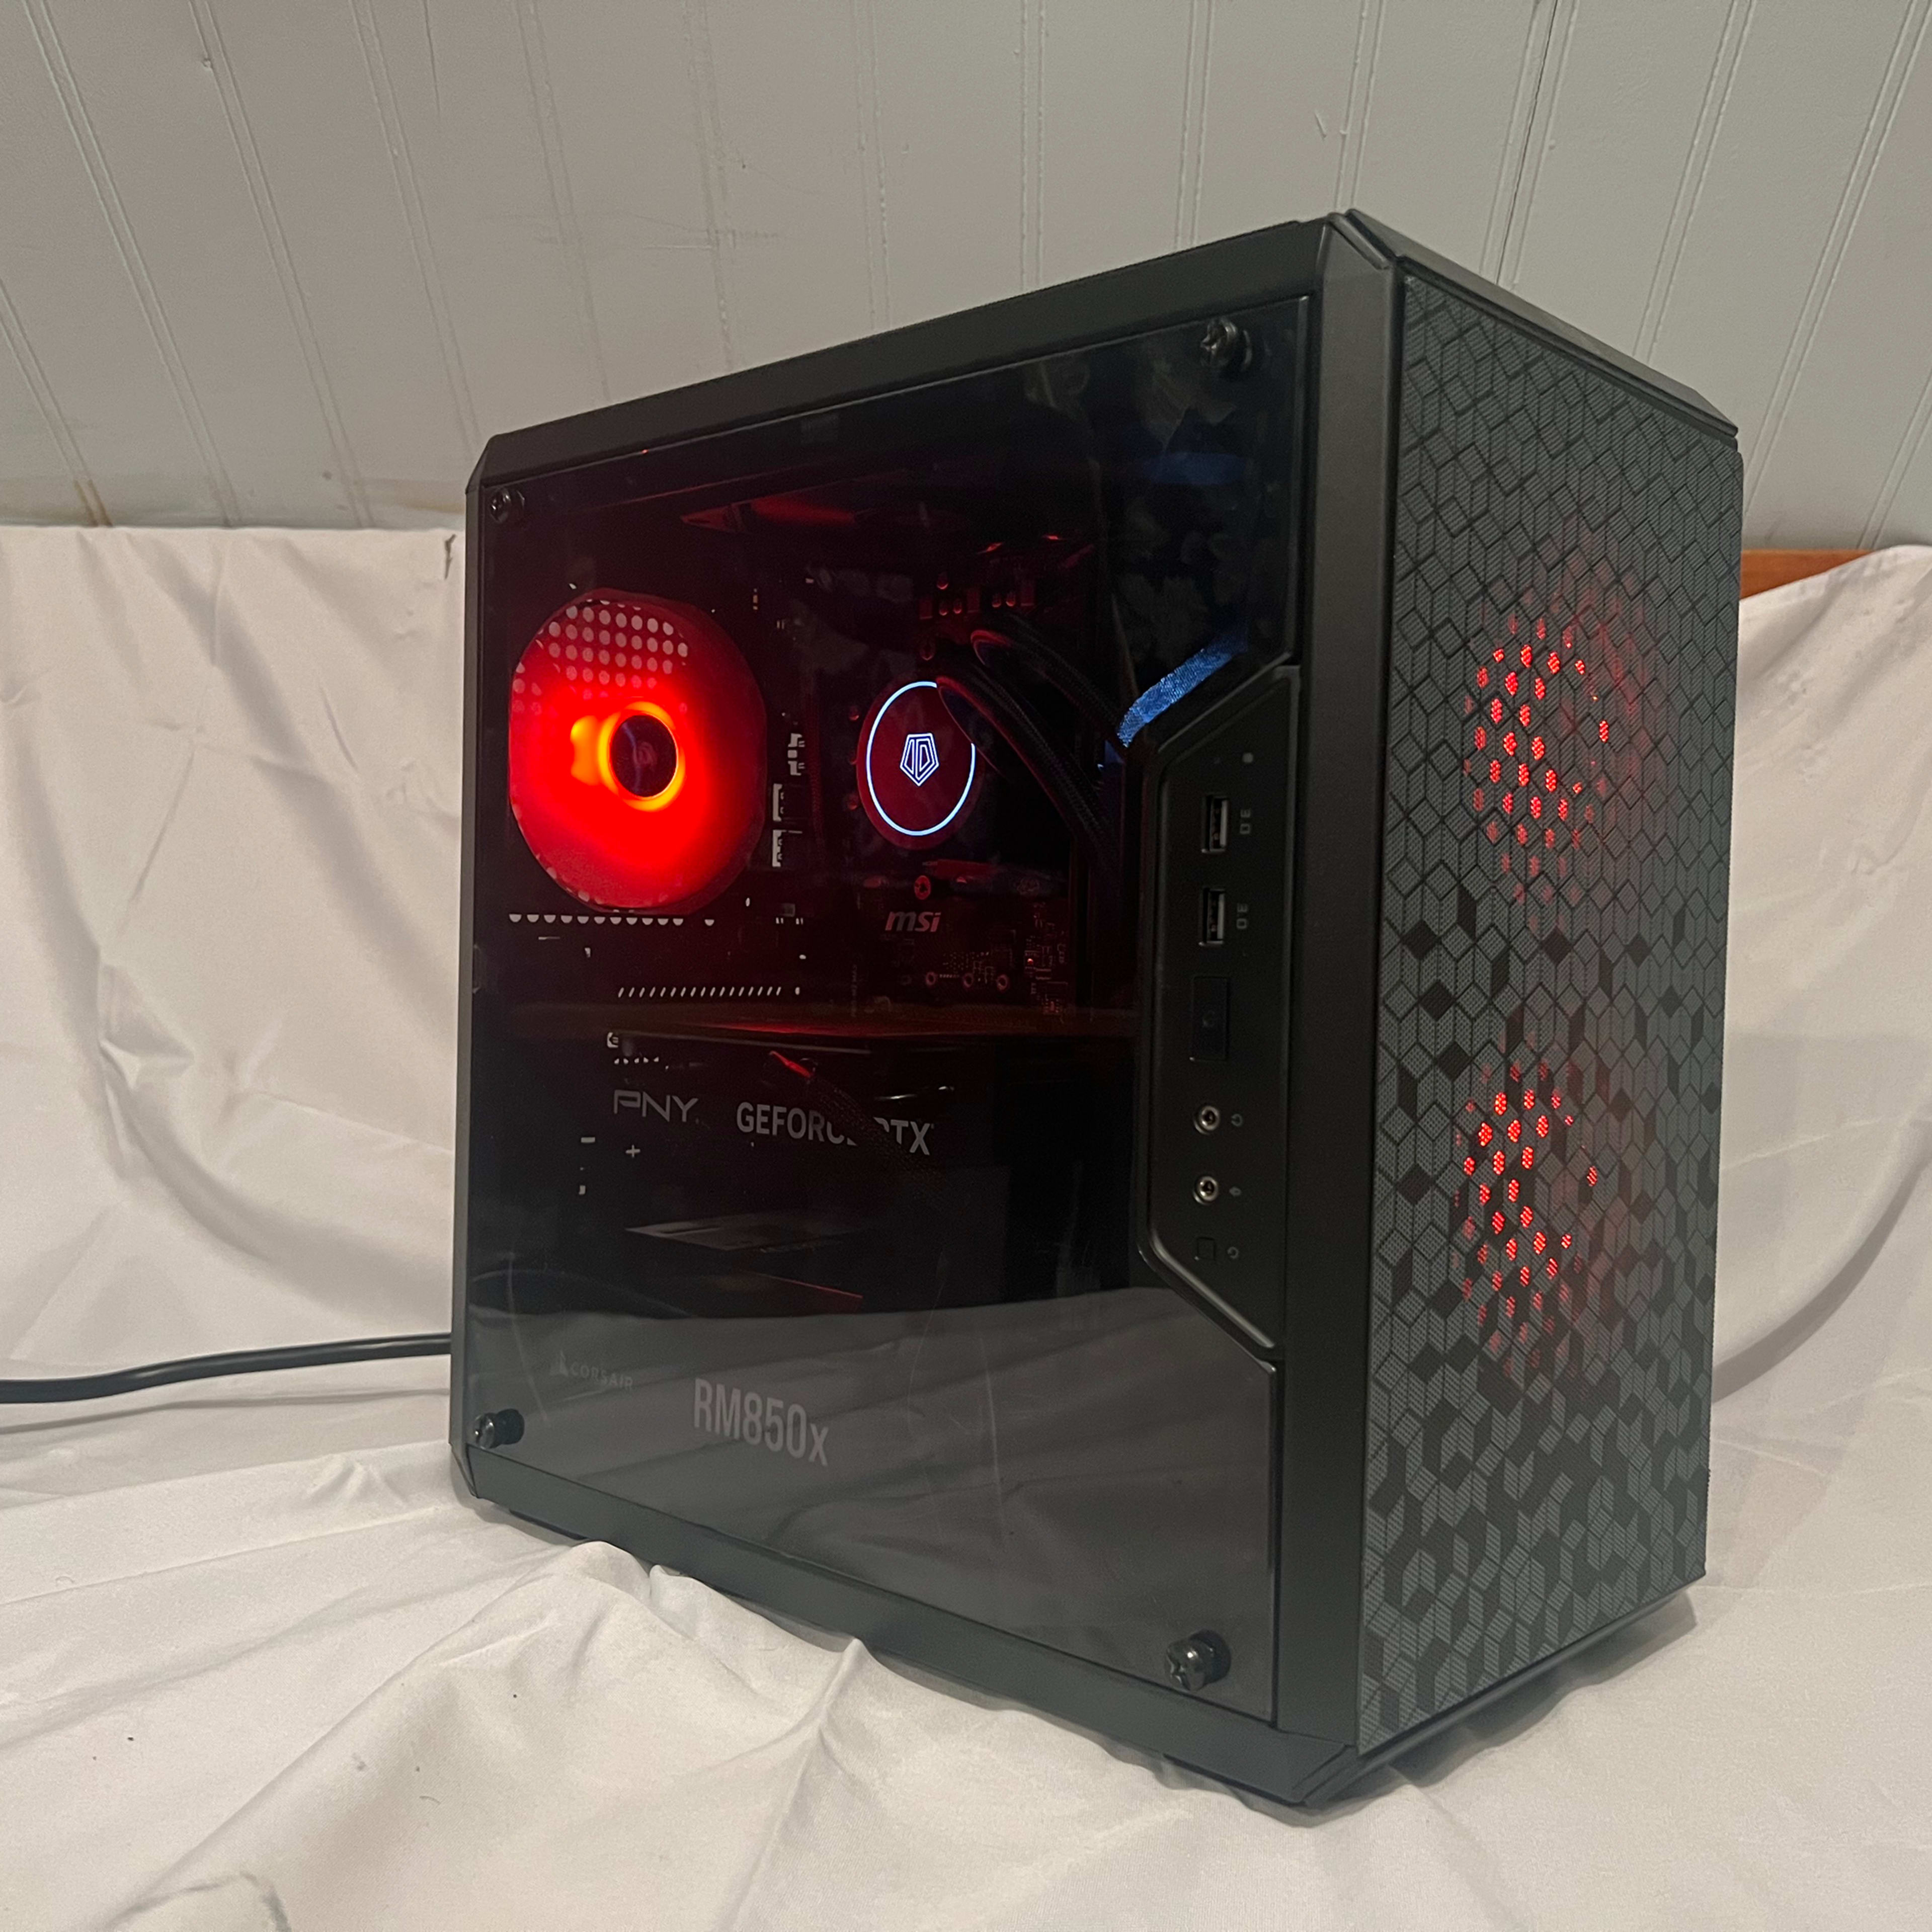 Clear out special "Saving Grace" 3600x, RTX 4060, 32gb ram, 850watt, WI-FI included gaming pc